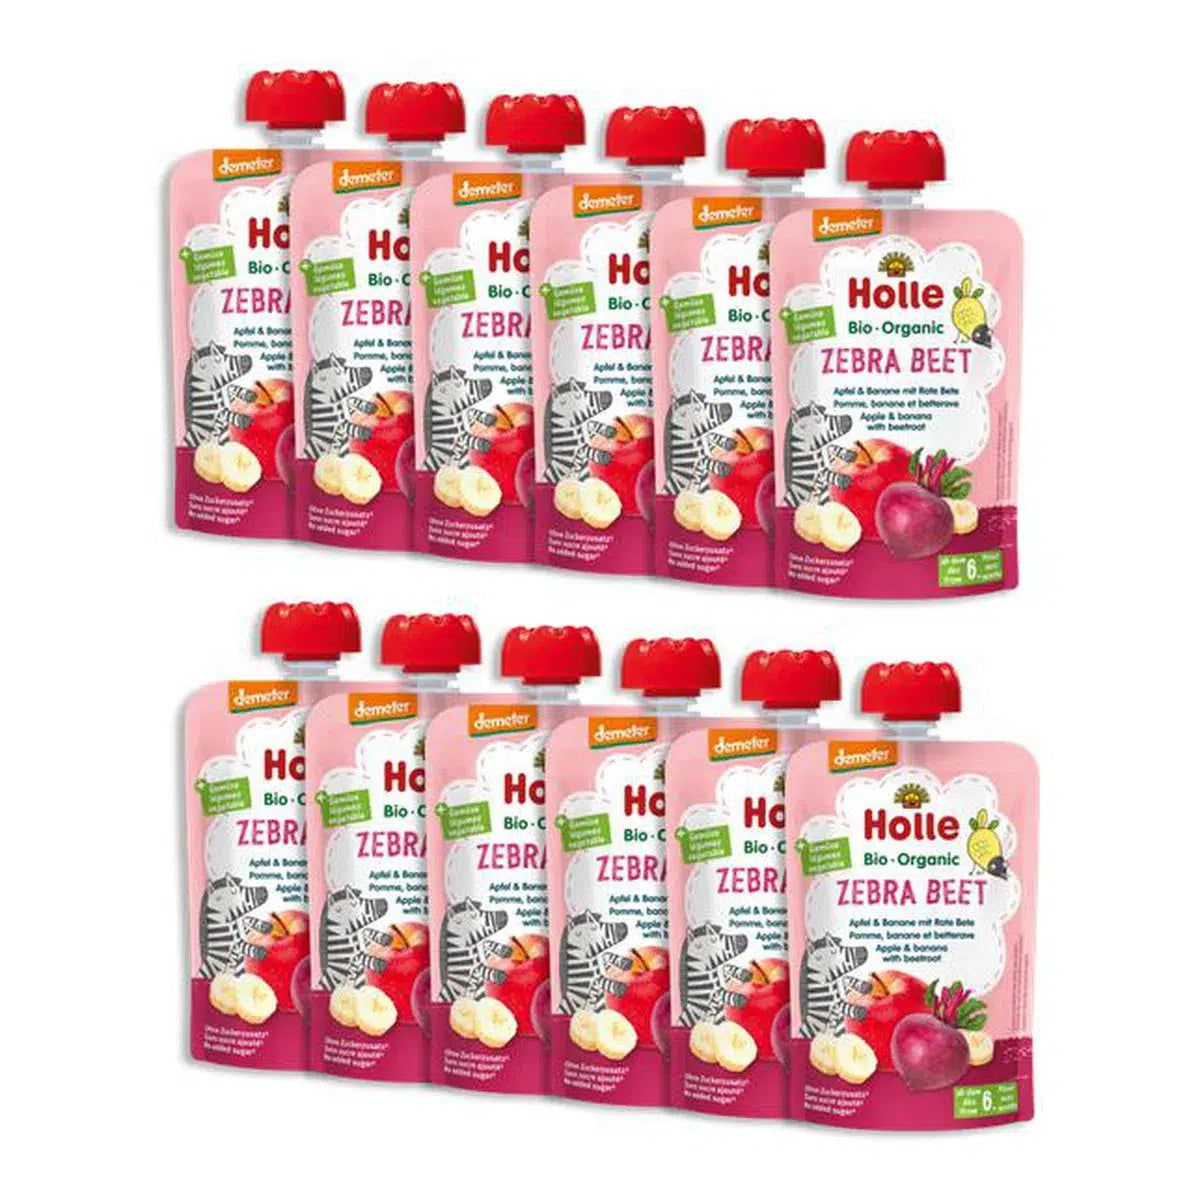 Holle Zebra Beet: Apple, Banana & Beetroot (6+ Months) - 12 Pouches